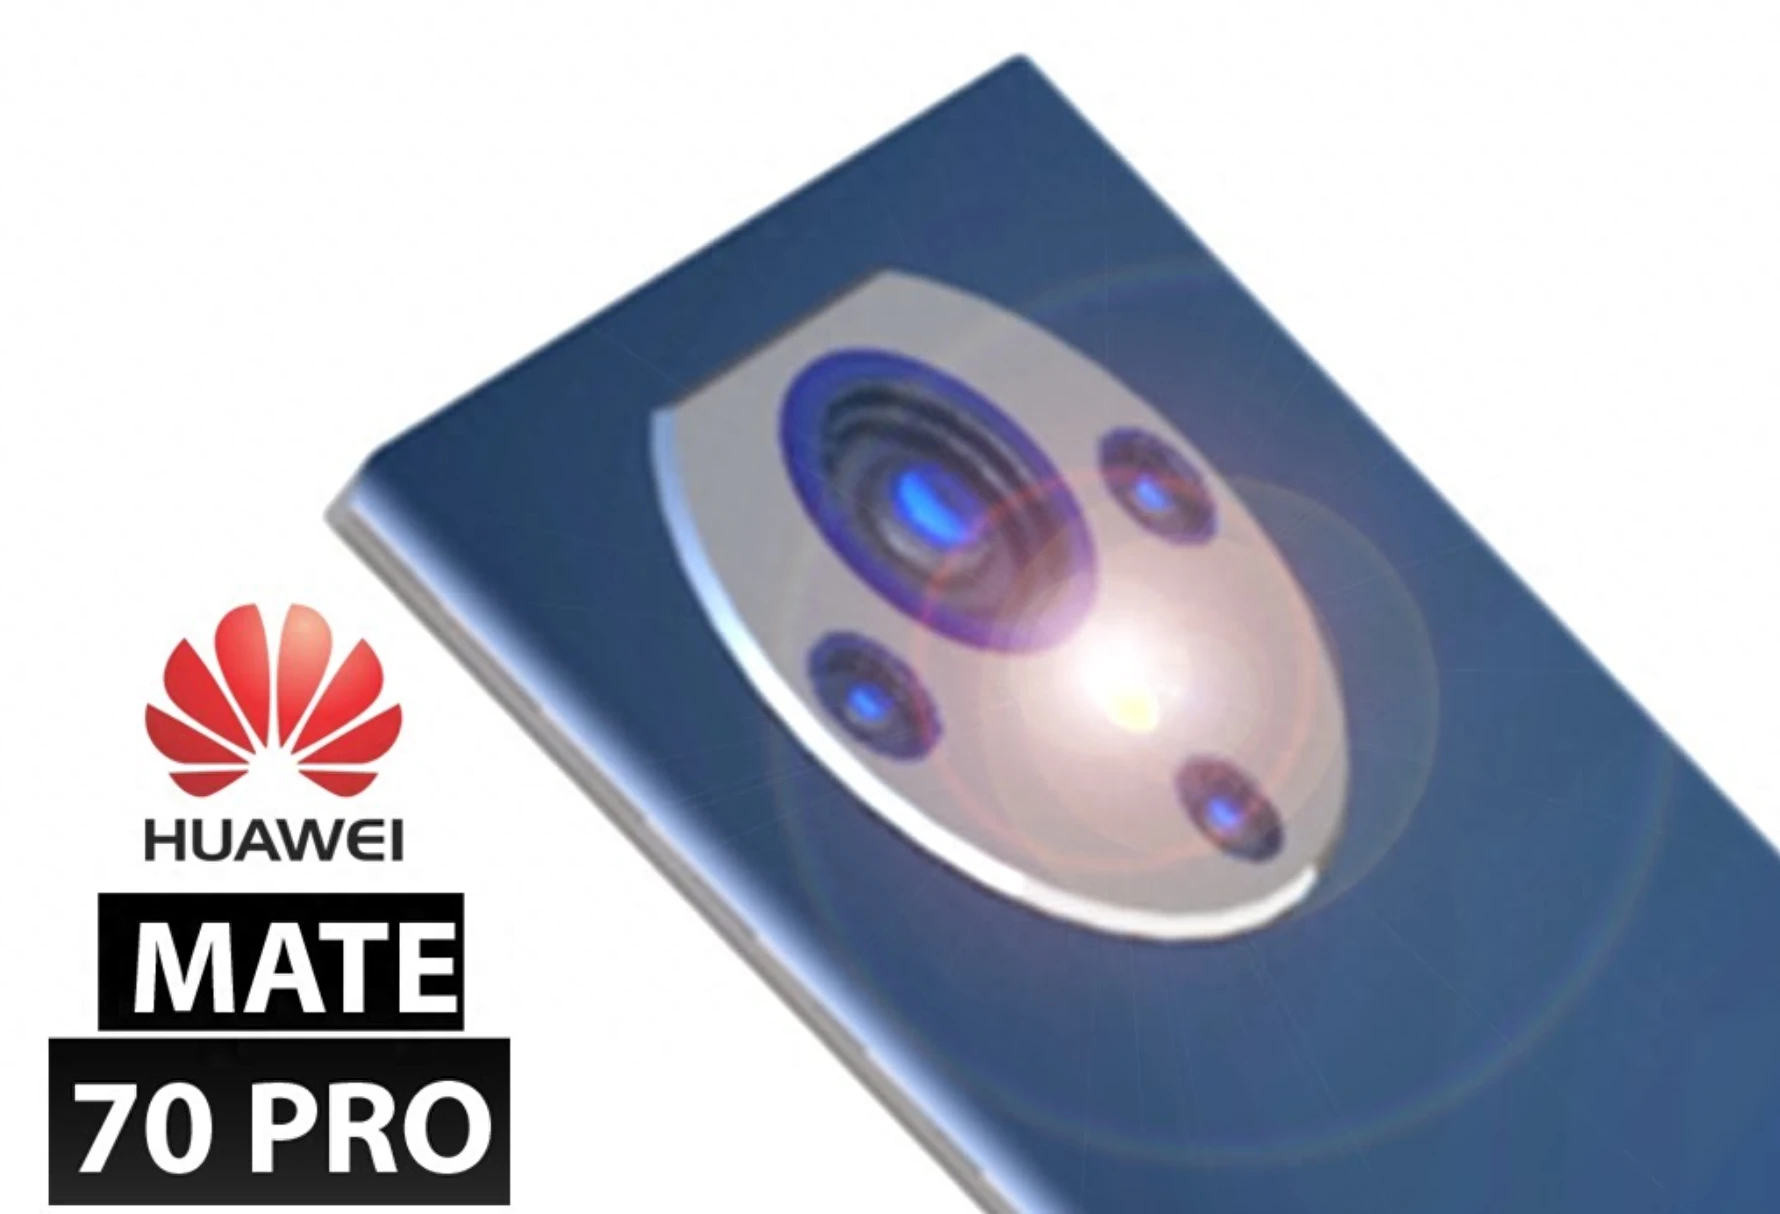 Huawei Mate 70 Specs, price and features - Specifications-Pro